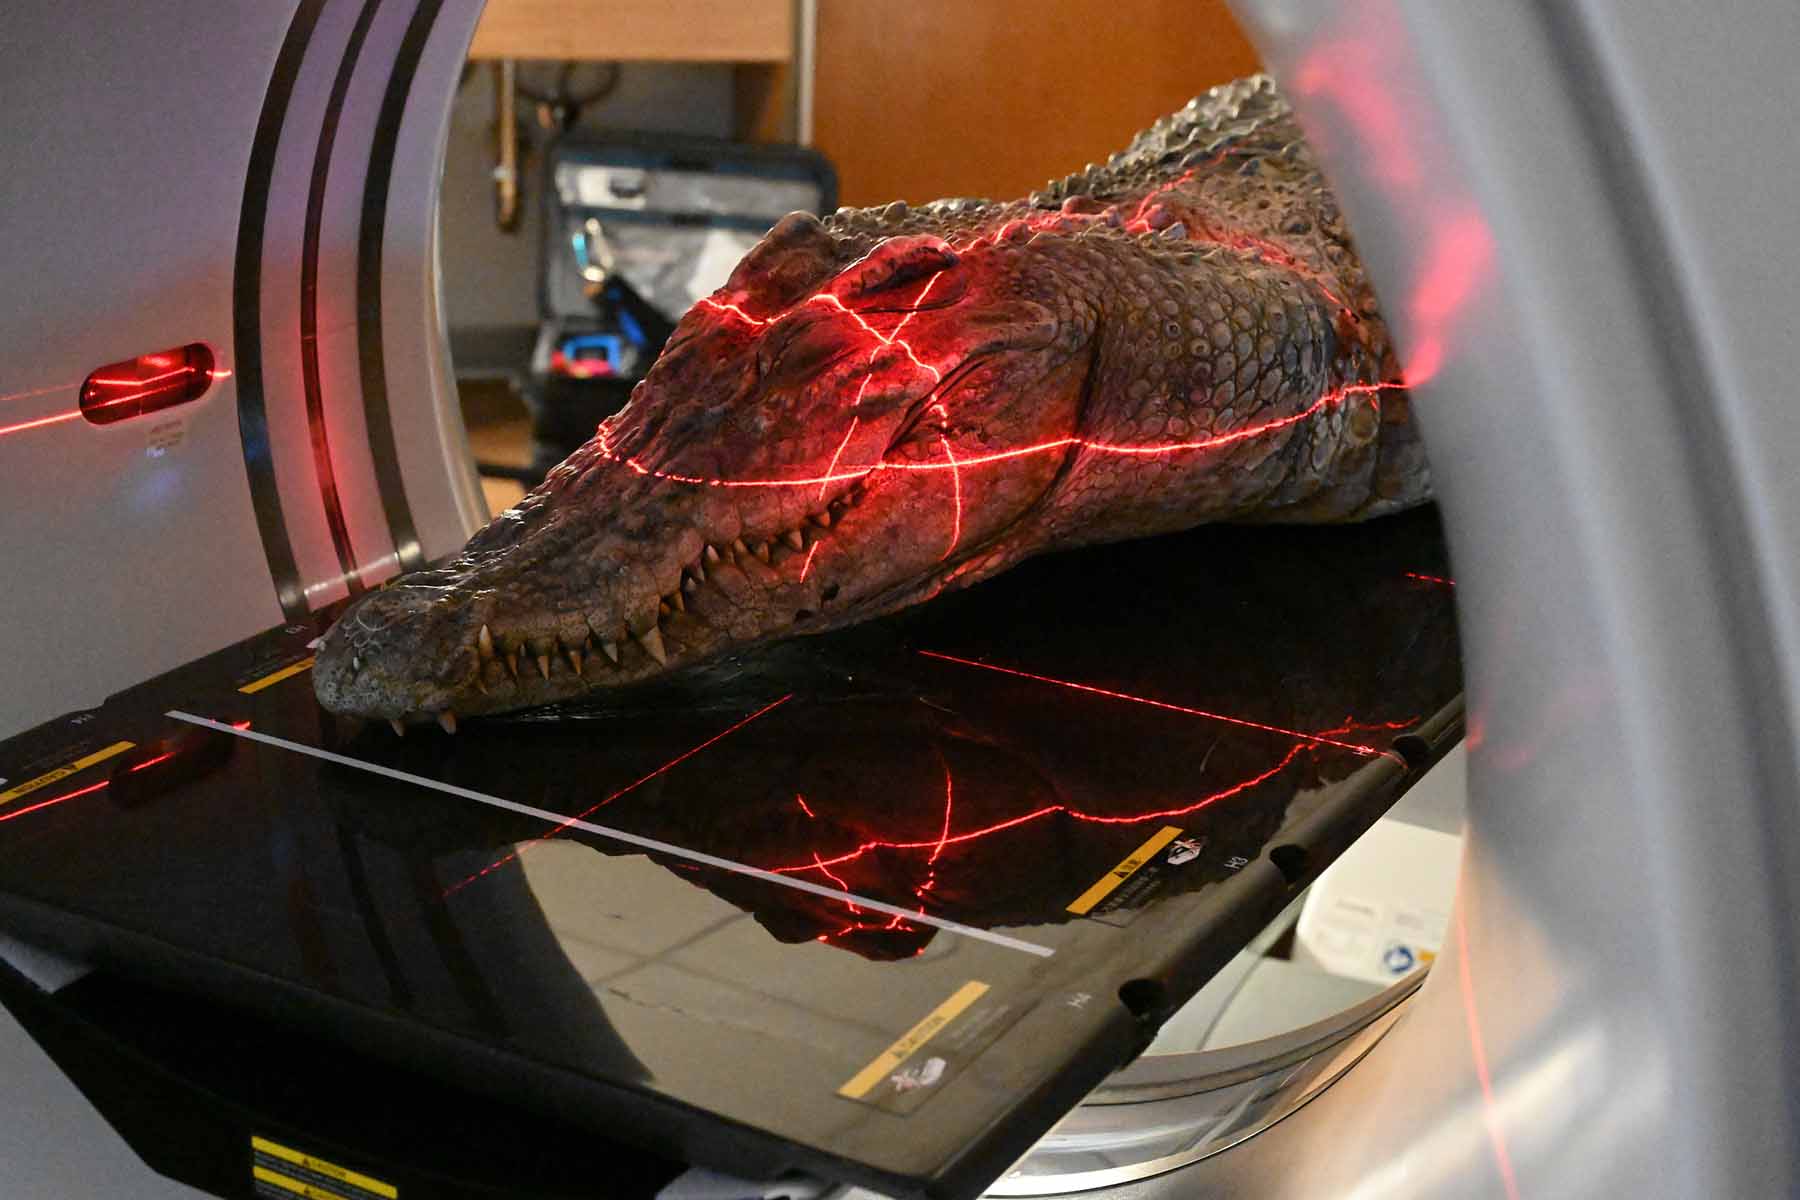 A frozen crocodile specimen is sent through a CT scan for Dr. Witmer's research